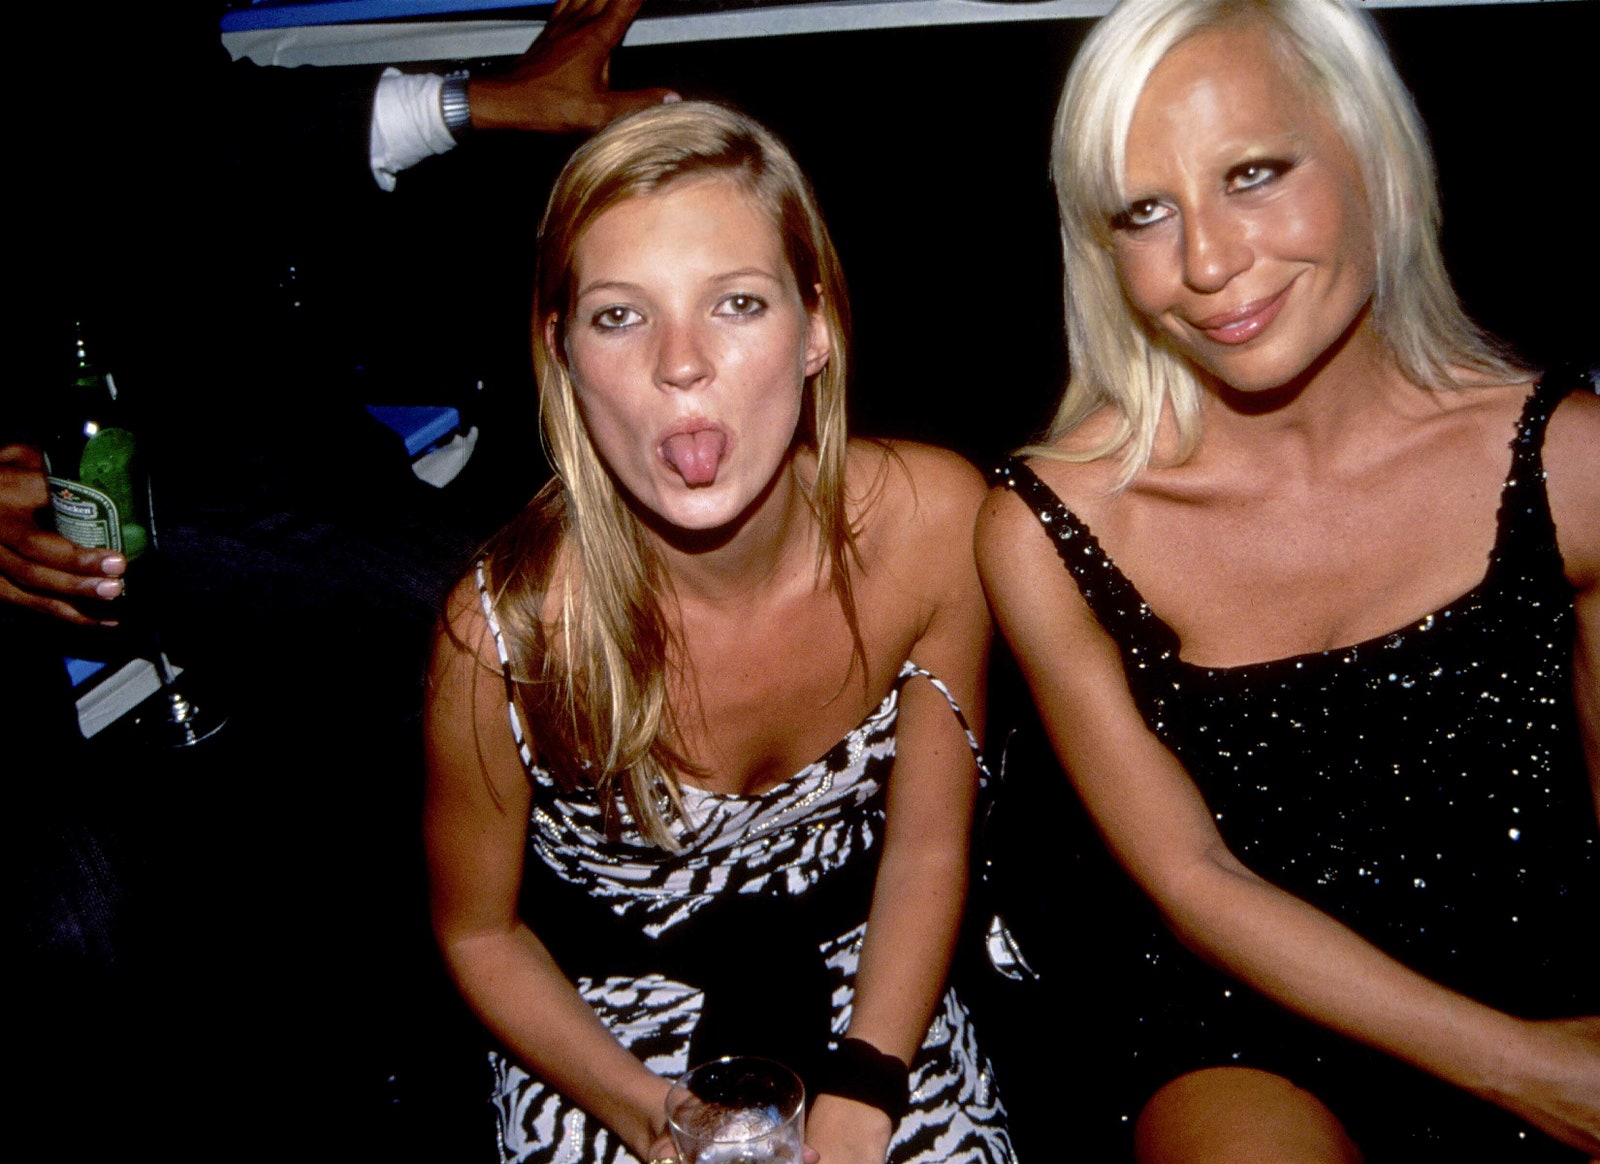 Image may contain Kate Moss Donatella Versace 90s style 90s party style supermodel style party style and fashion